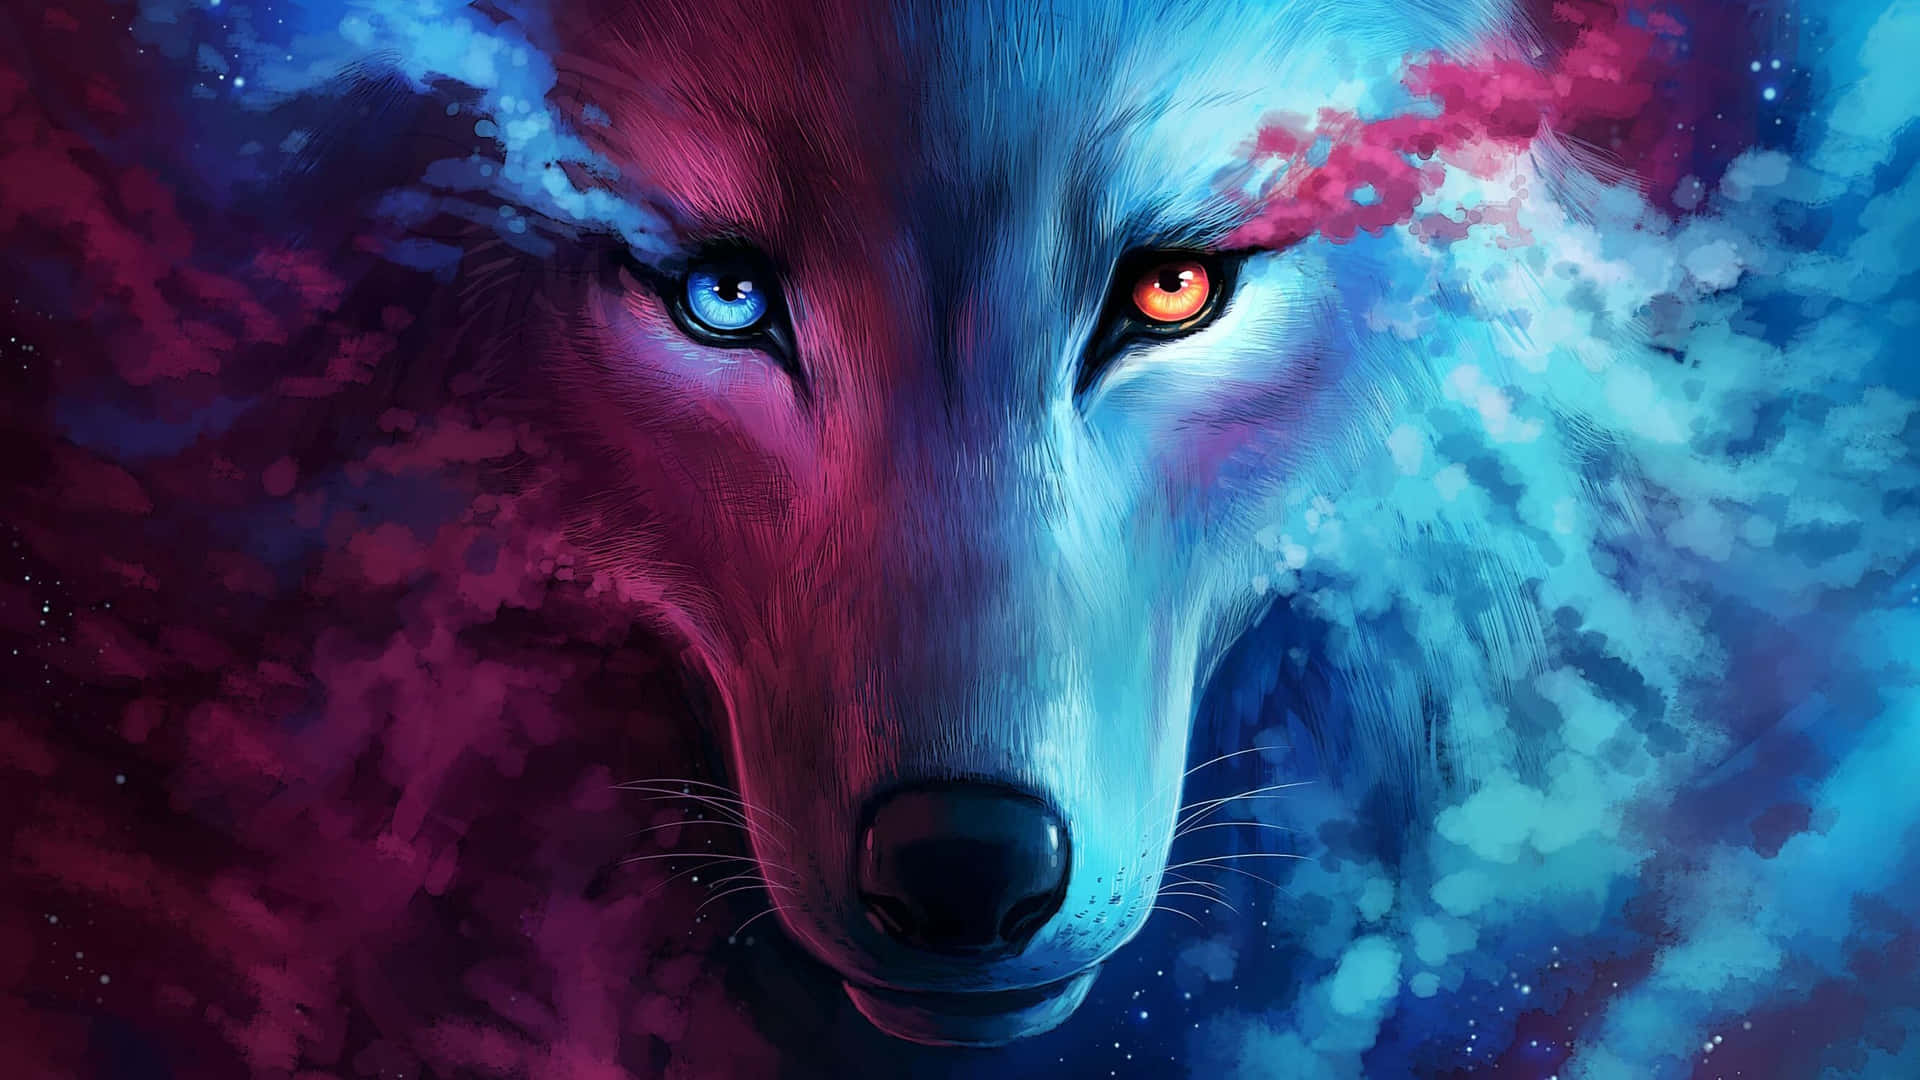 Cool Anime Wolf with a Perky Attitude Wallpaper